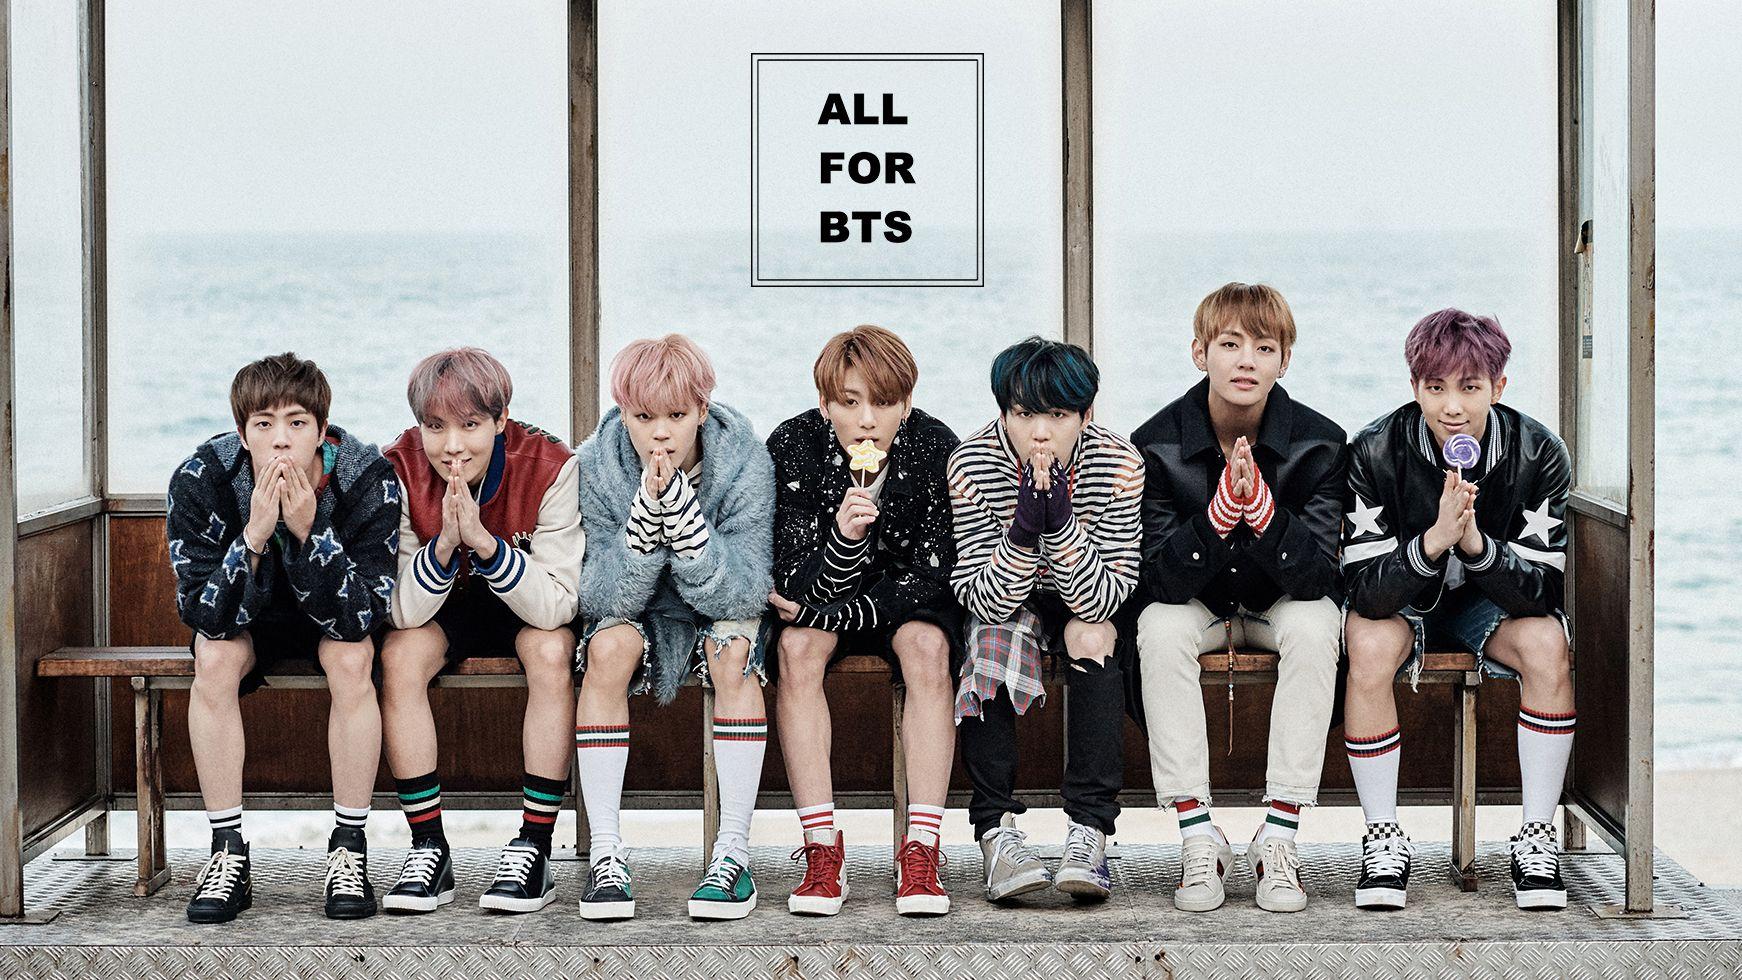 Bts Wallpaper Reply 2 Retweets 8 Likes, BTS Spring Day